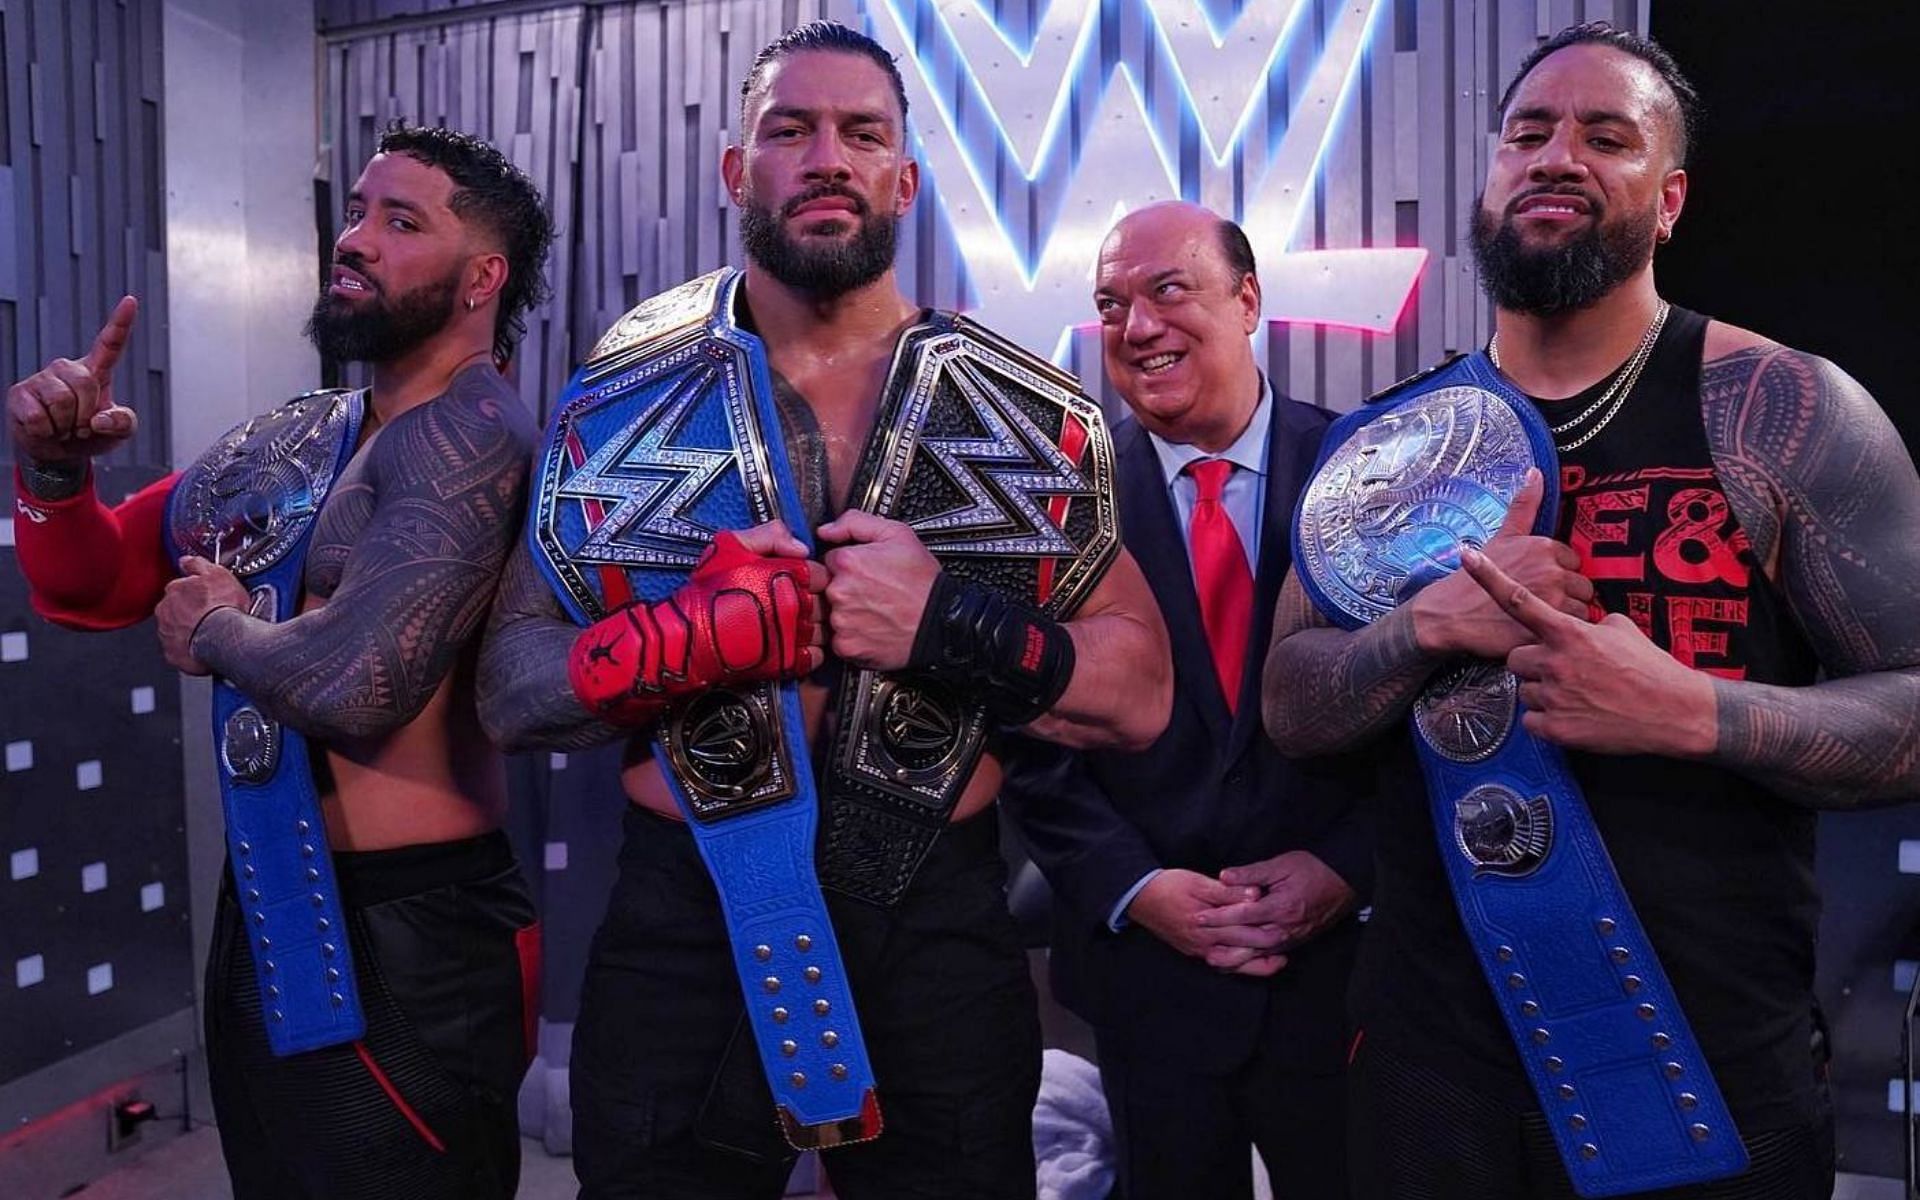 Roman Reigns, The Usos, and Paul Heyman as The Bloodline